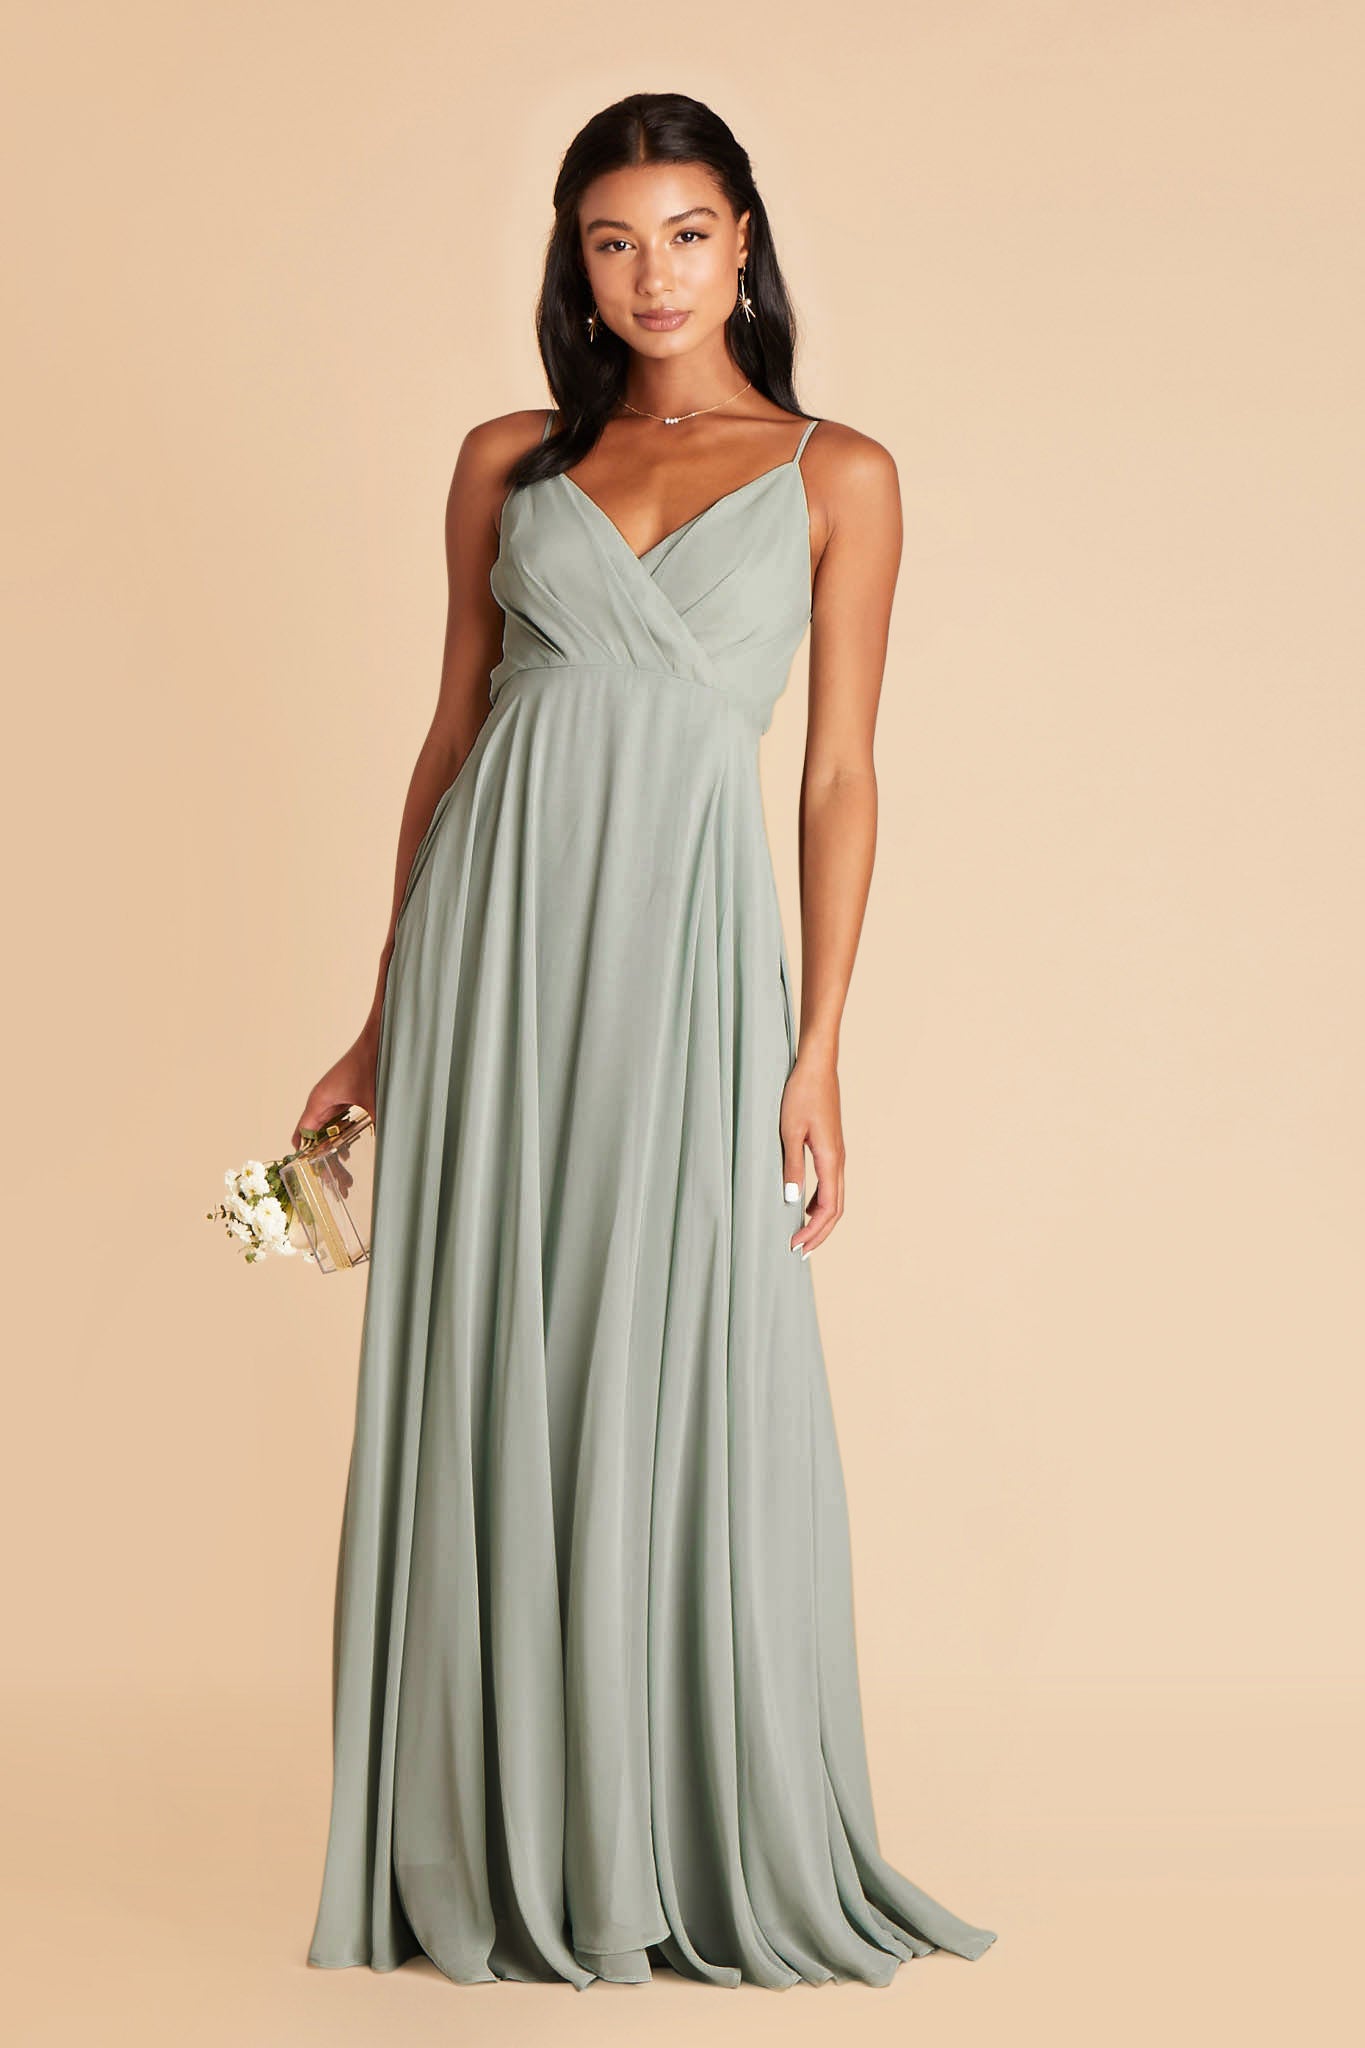 Bridesmaid Dresses Starting From $99